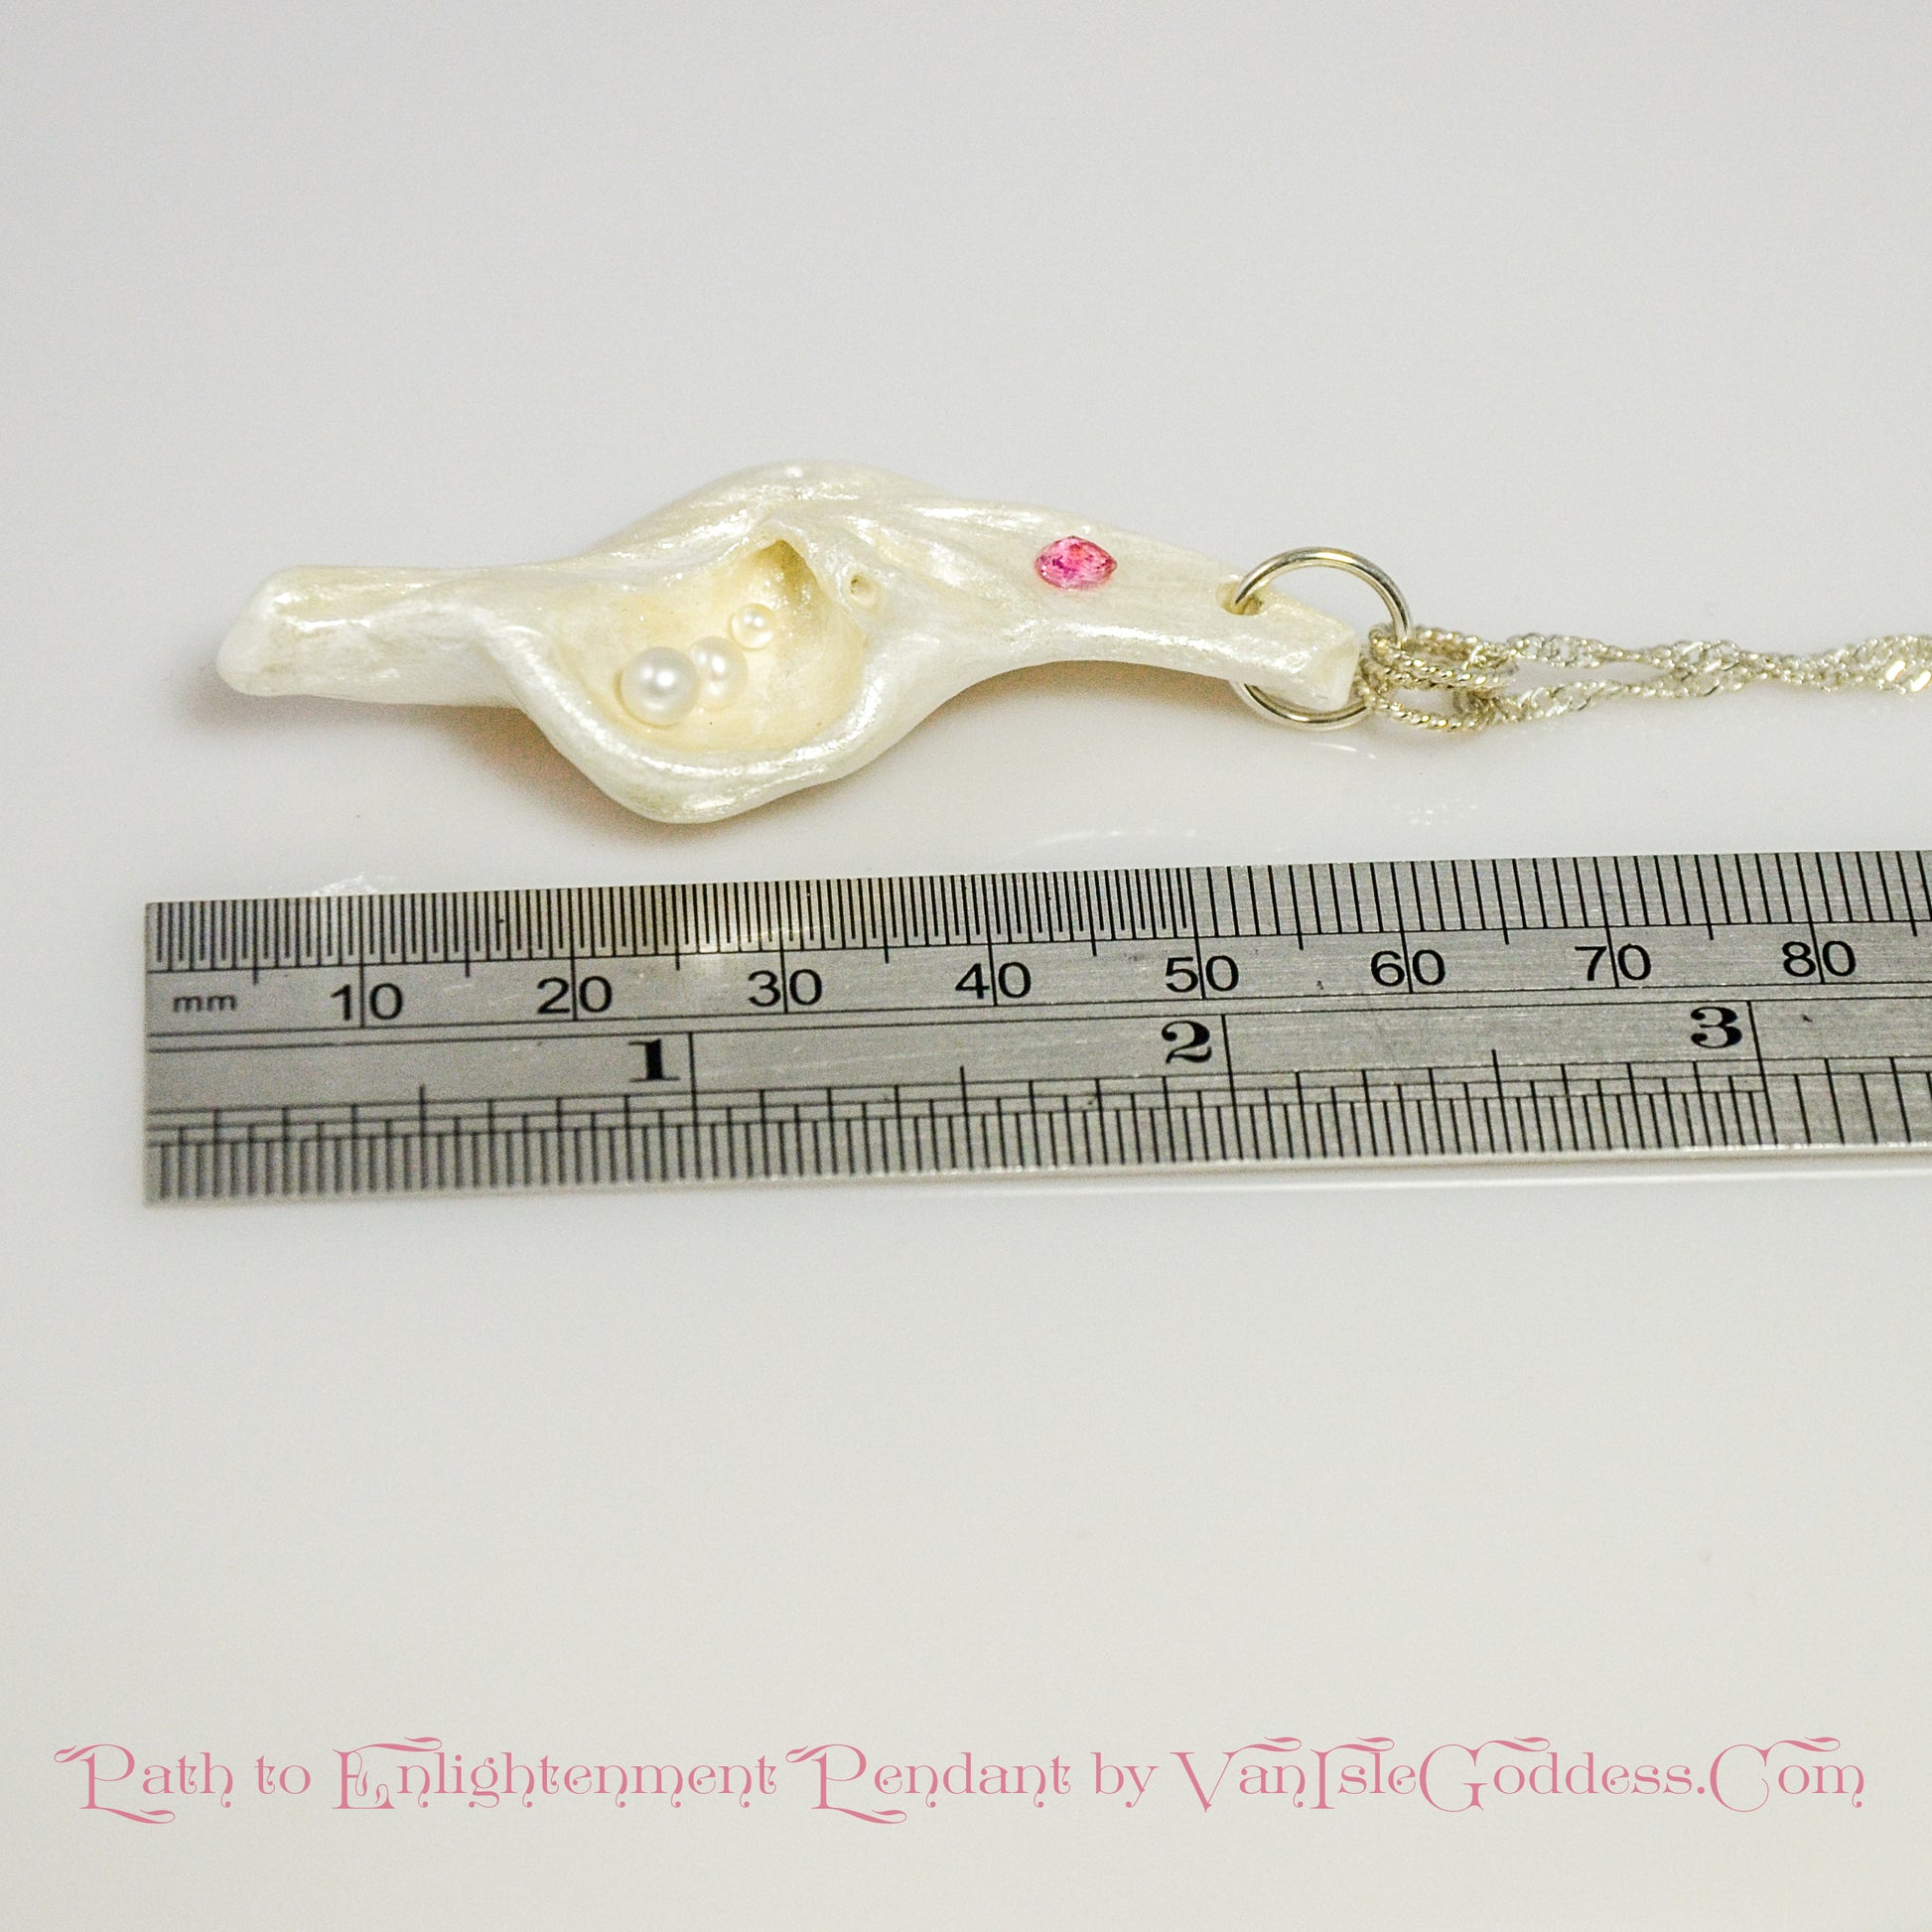 A trio of white baby freshwater pearls and a teardrop rose cut pink tourmaline gemstone compliments the seashell pendant beautifully. The pendant is shown laying down along a ruler so the viewer can see the length of the pendant.